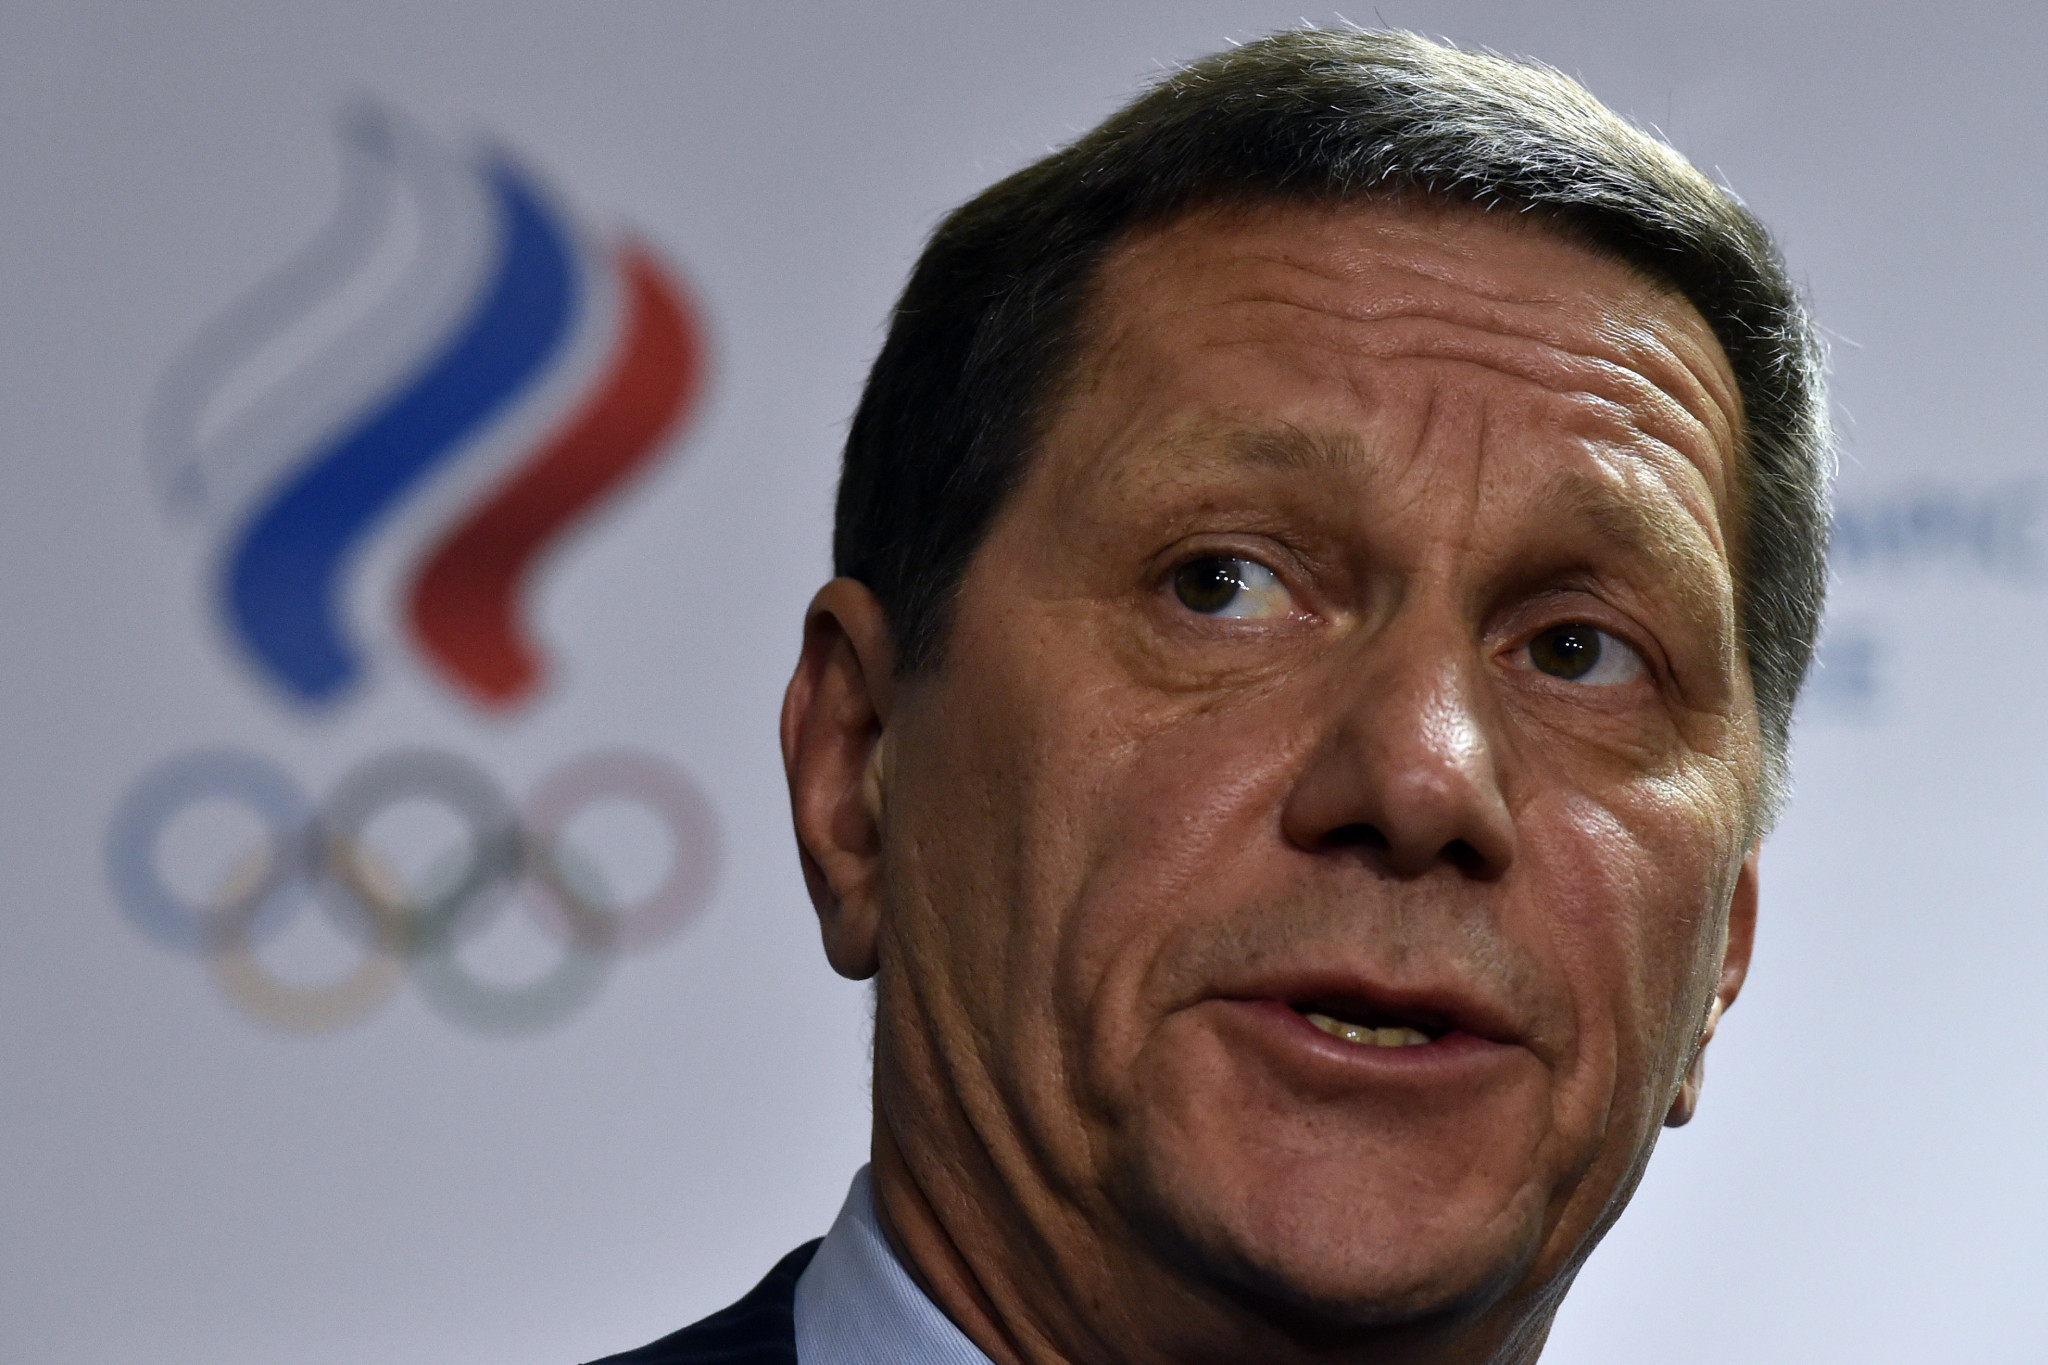 A "crime" to exclude Russia from Olympics, claims Sports Minister